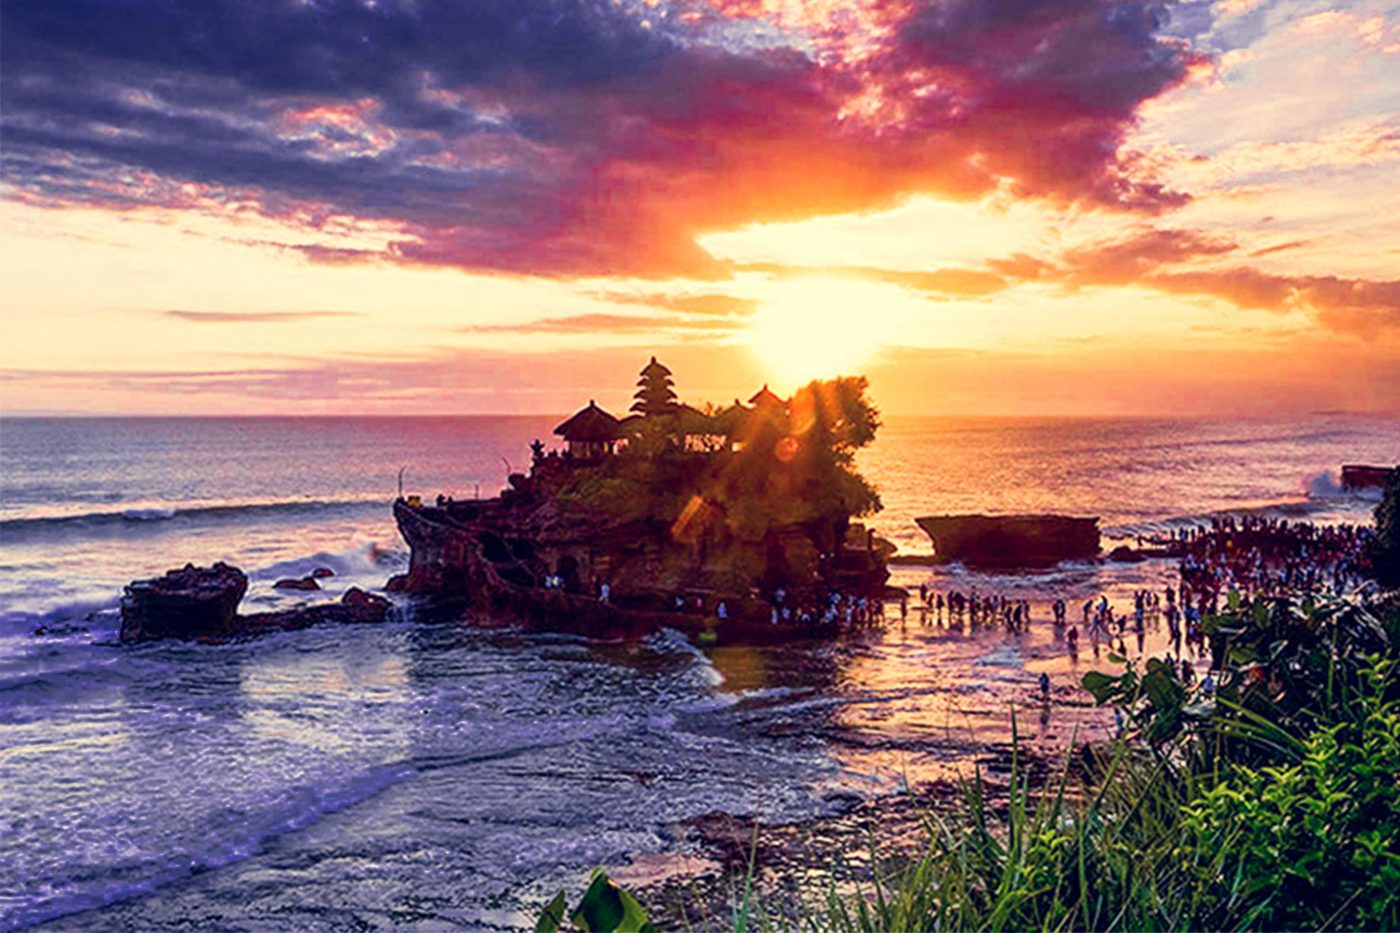 Tanah Lot Sunset Tour - Bali Tour Packages And Honeymoon Itinerary â Travel Agent In Bali